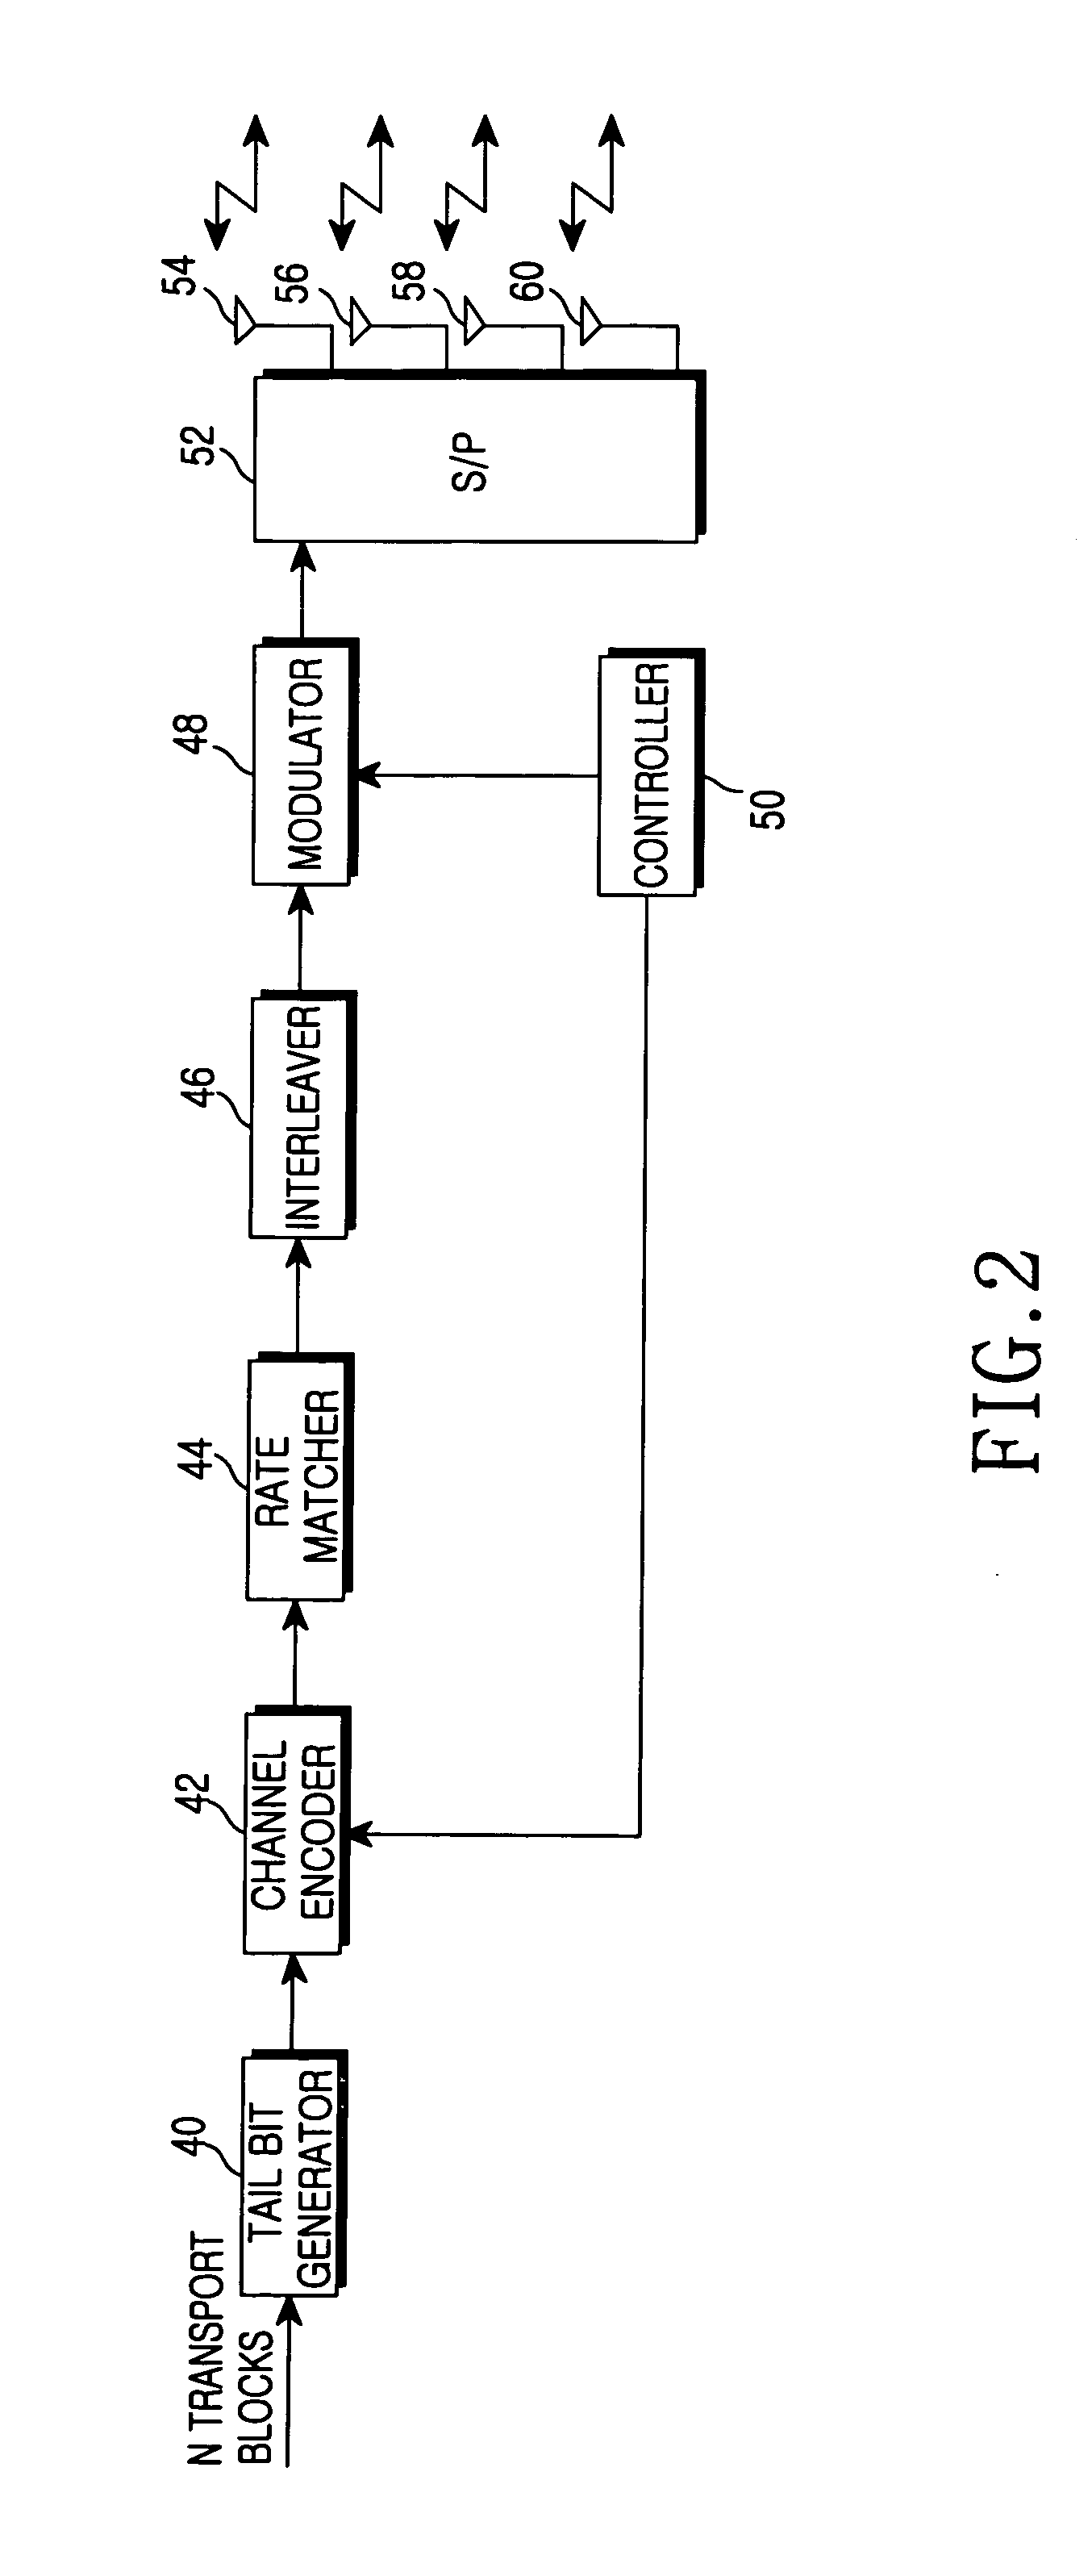 Apparatus and method for transmitting and receiving data using an antenna array in a mobile communication system